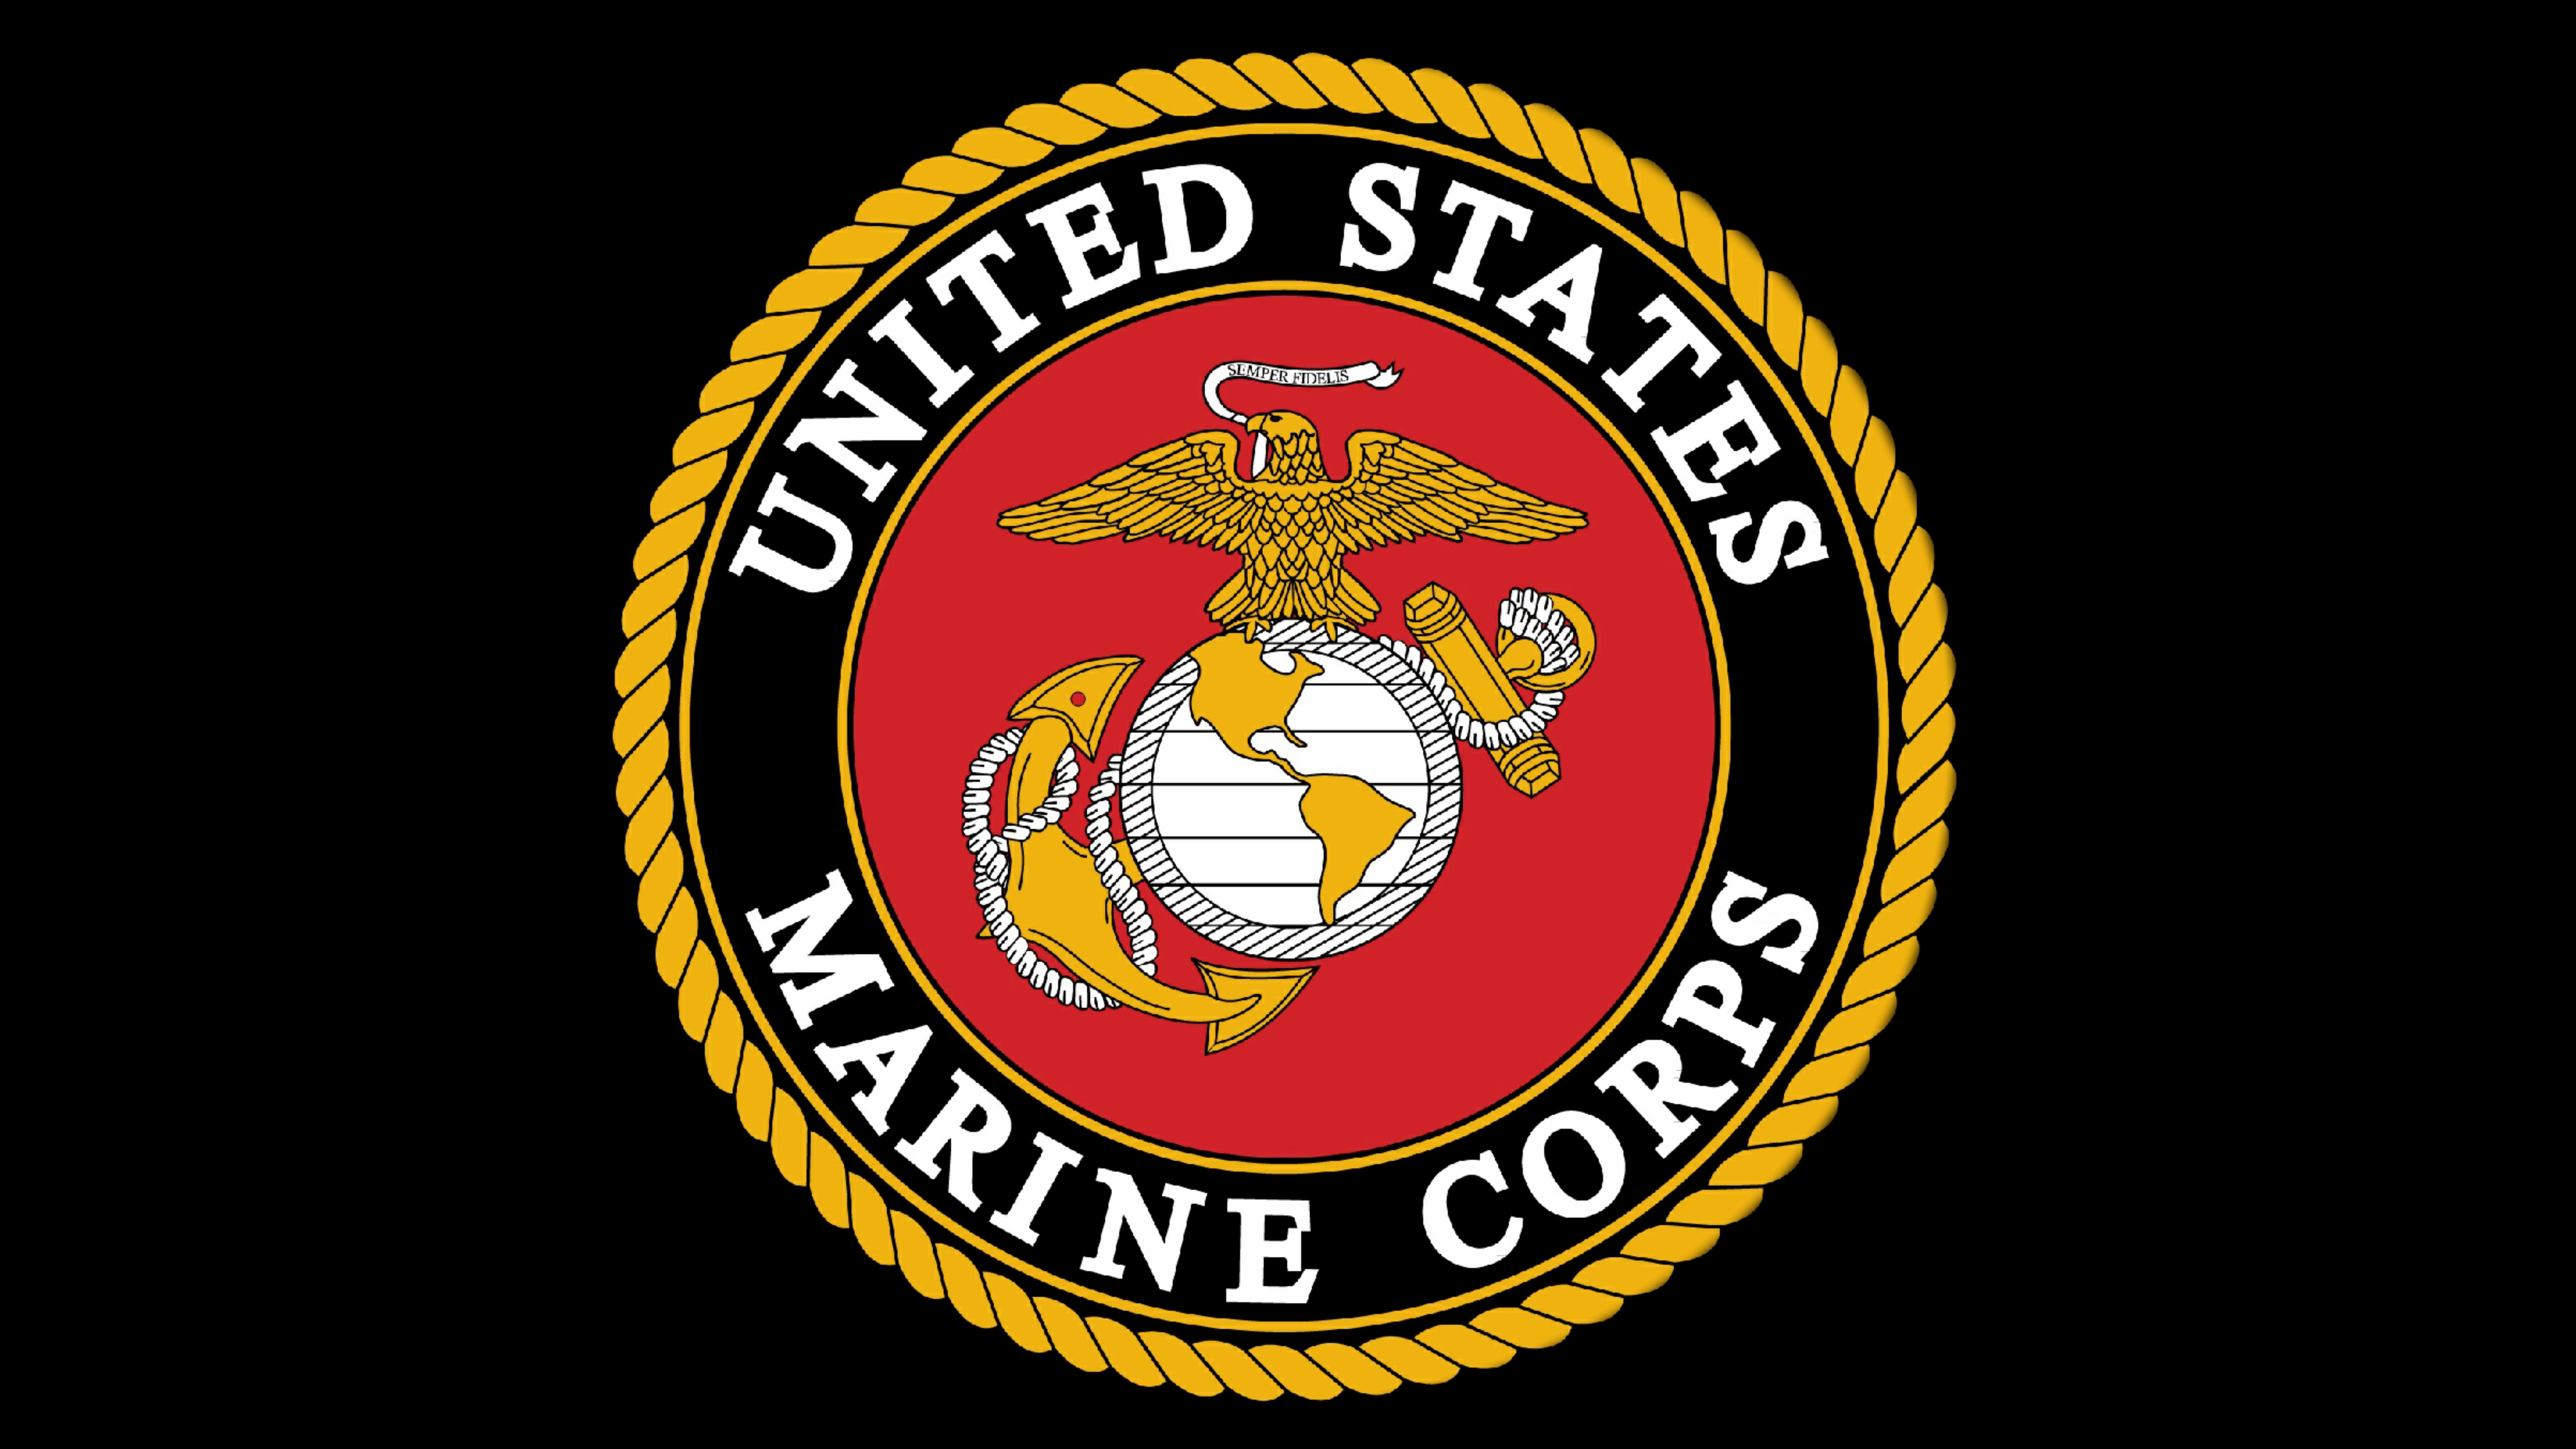 Marines Wallpapers